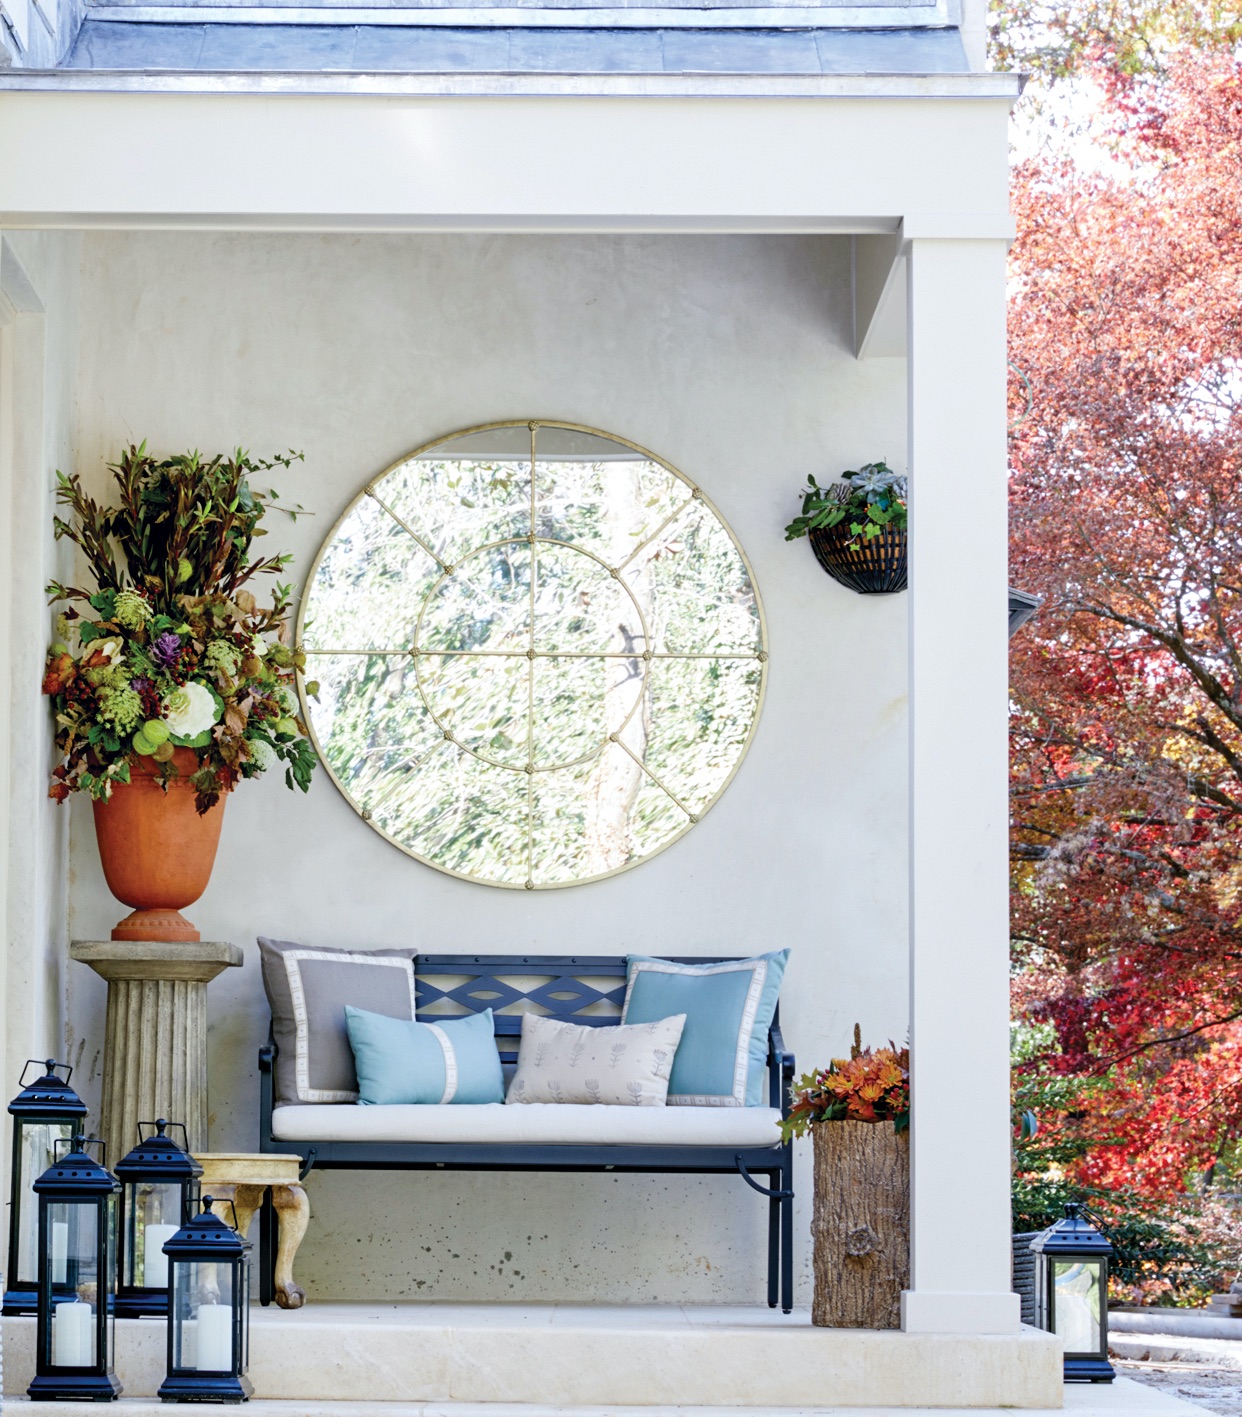 Back porch with bench, column pedestal with large flower arrangement, metal candle lanterns, and a large round mirror.